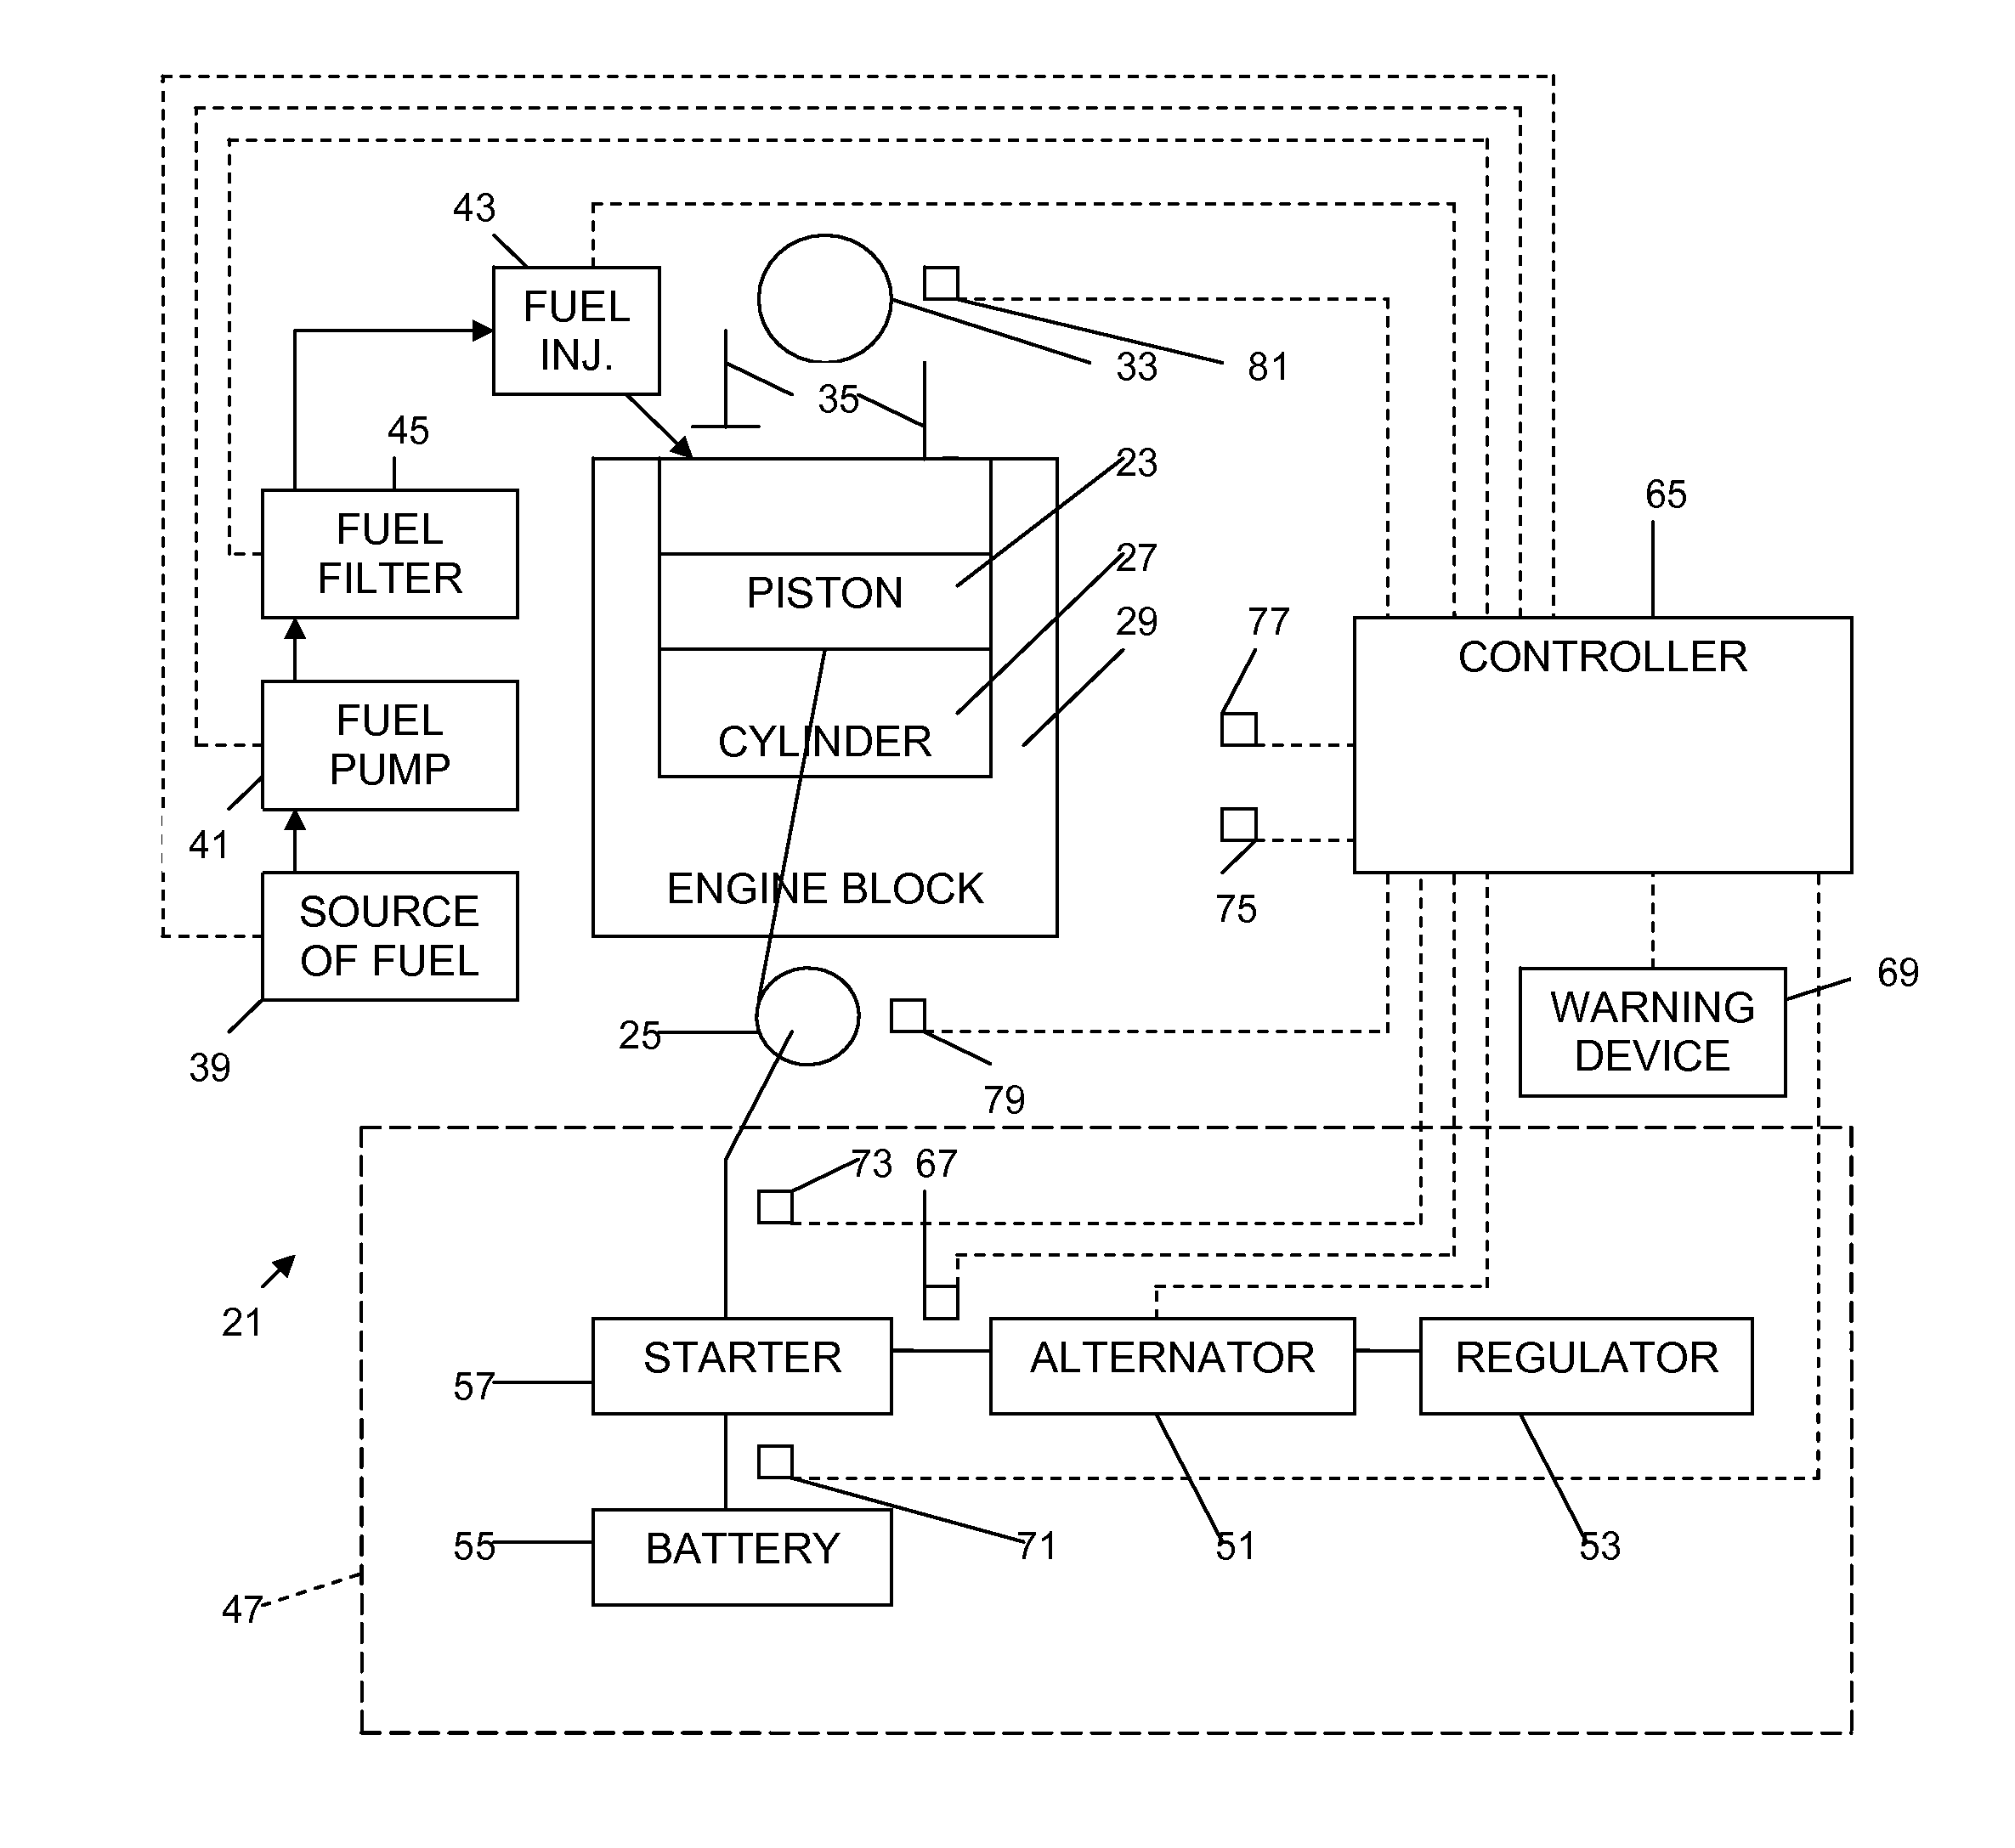 Method for monitoring an engine starting system and engine including starting system monitor